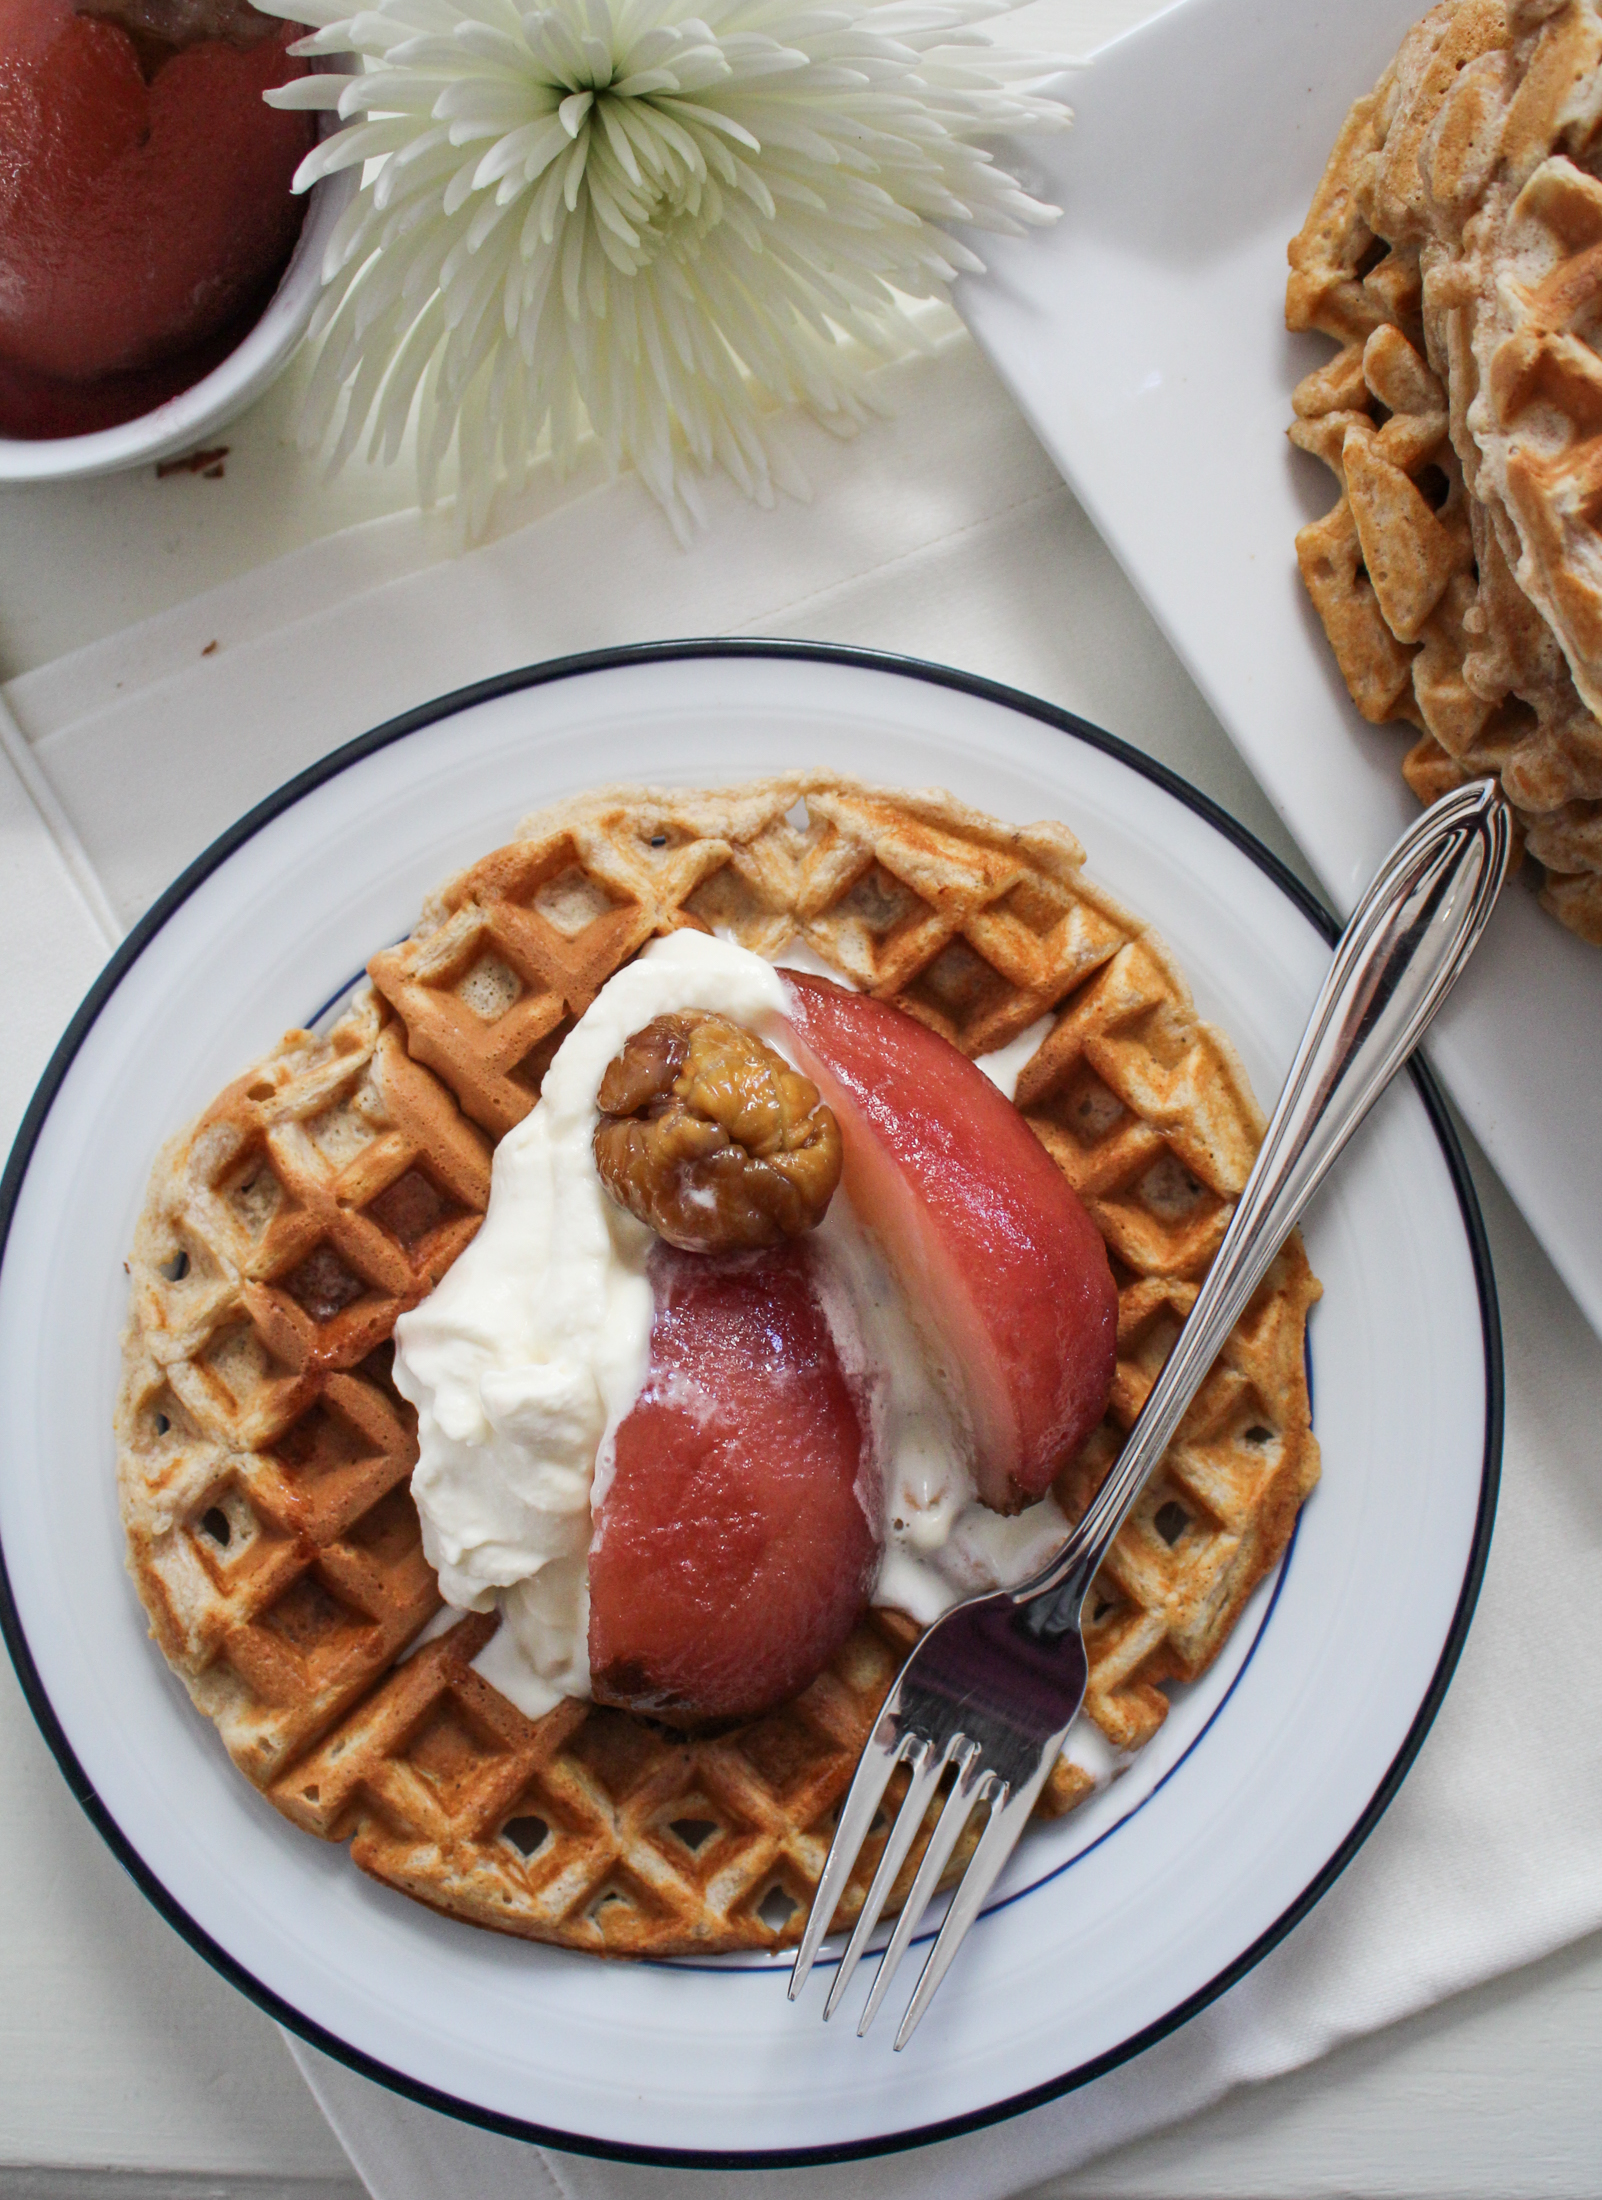 Brown-Butter Chestnut Waffles with Poached Pears and Whipped Mascarpone {Katie at the Kitchen Door}